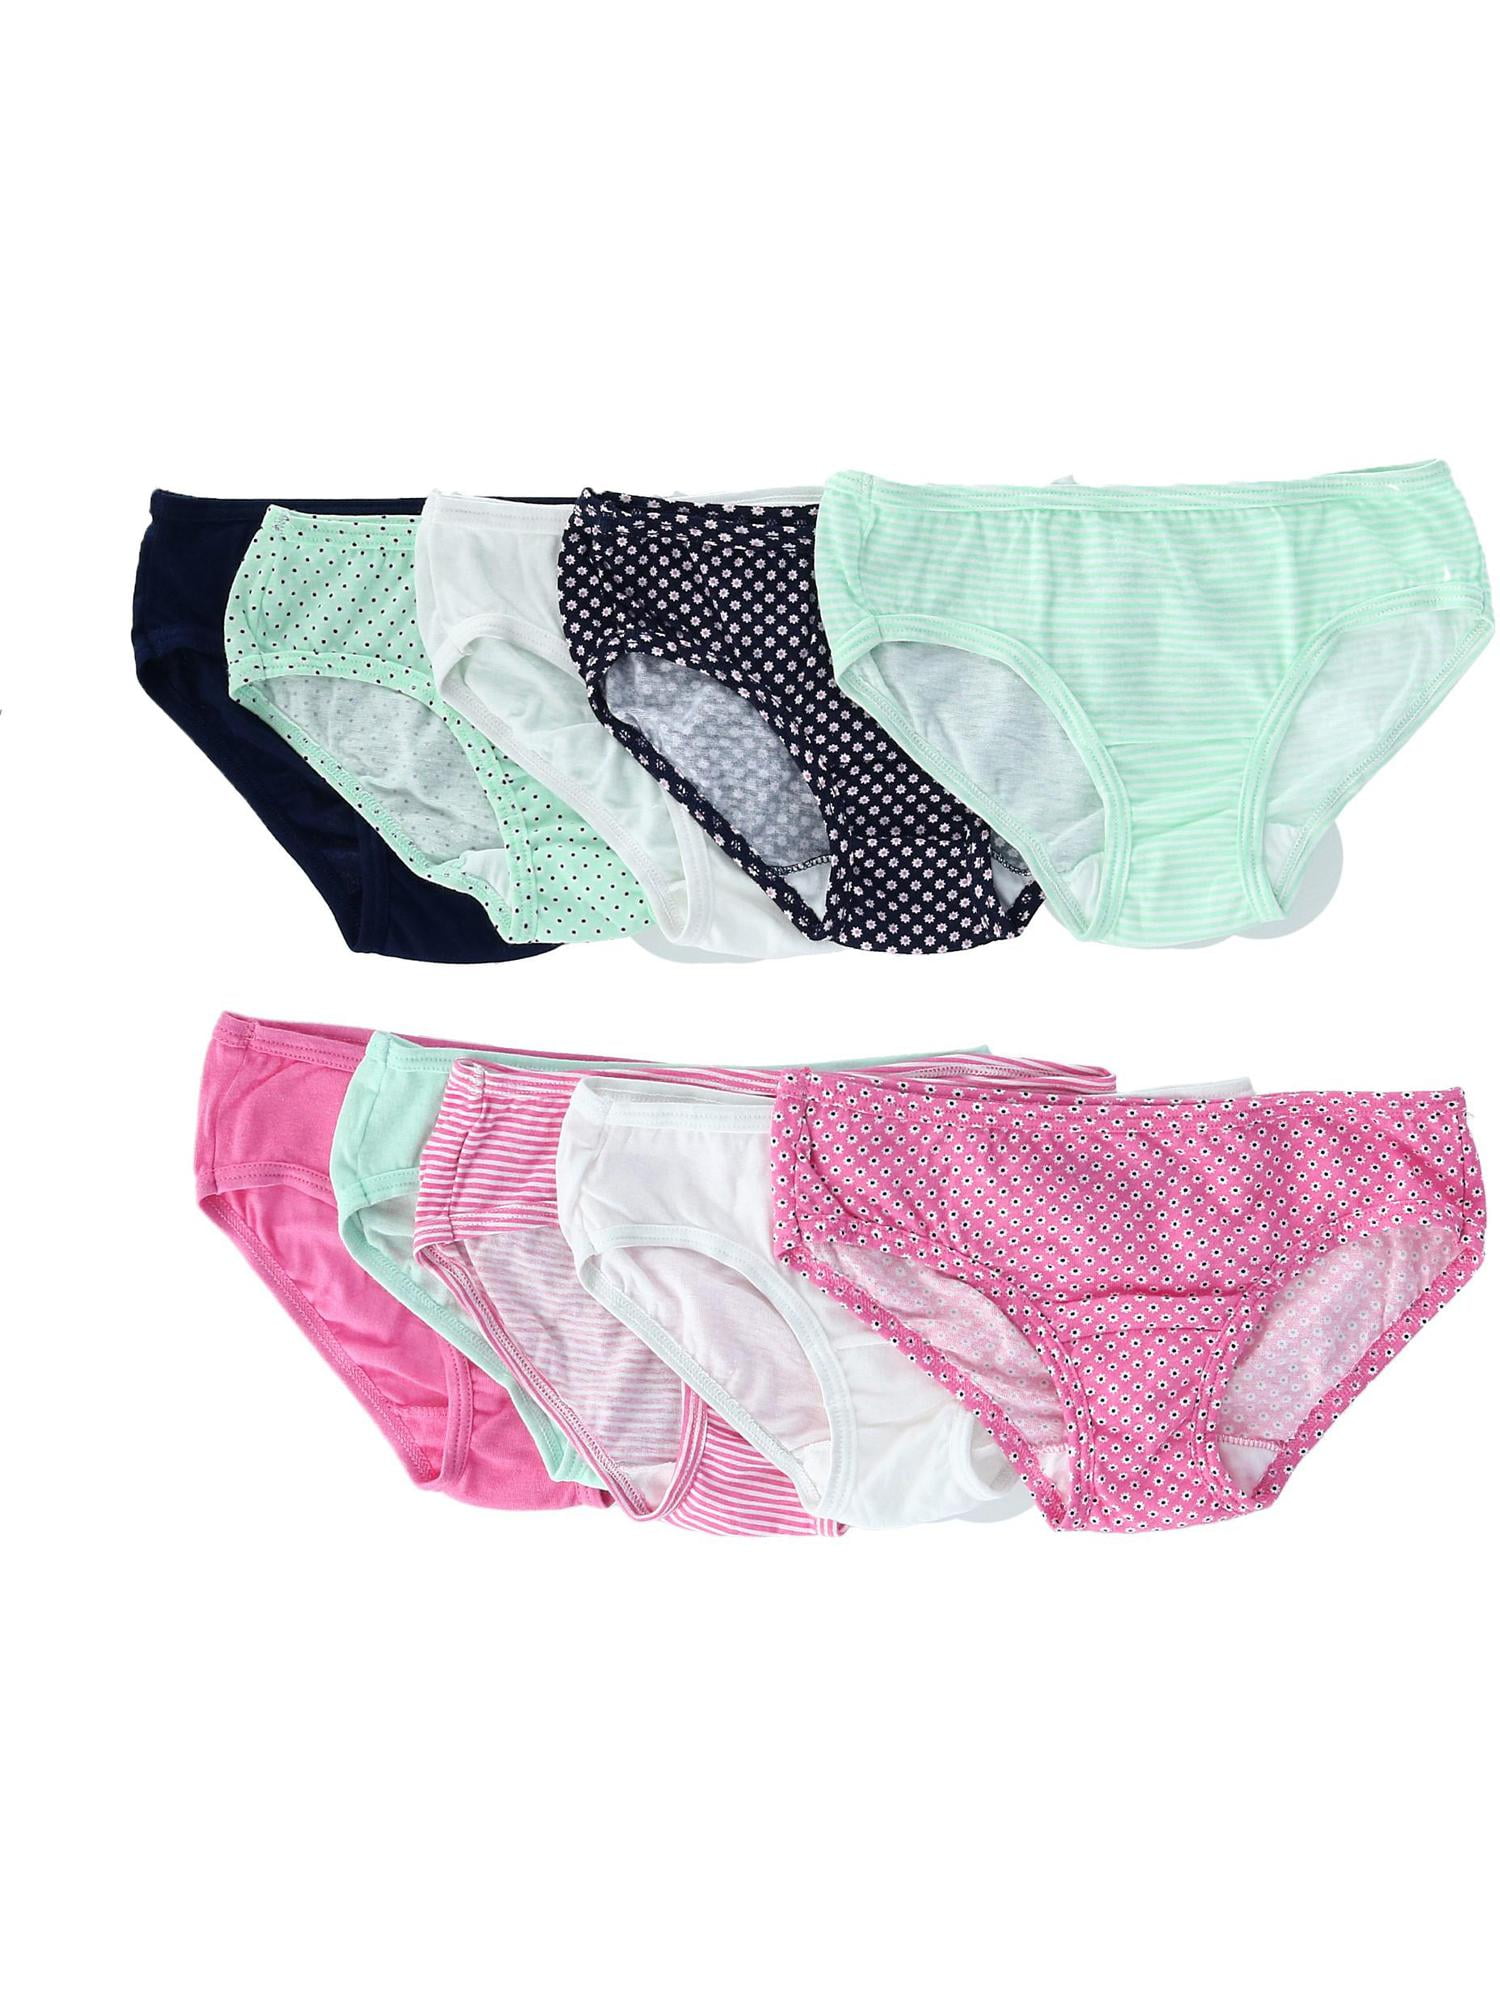 New~ Fruit of the Loom girls underwear 18 pack brief hipster Size 4 6 8 12  14